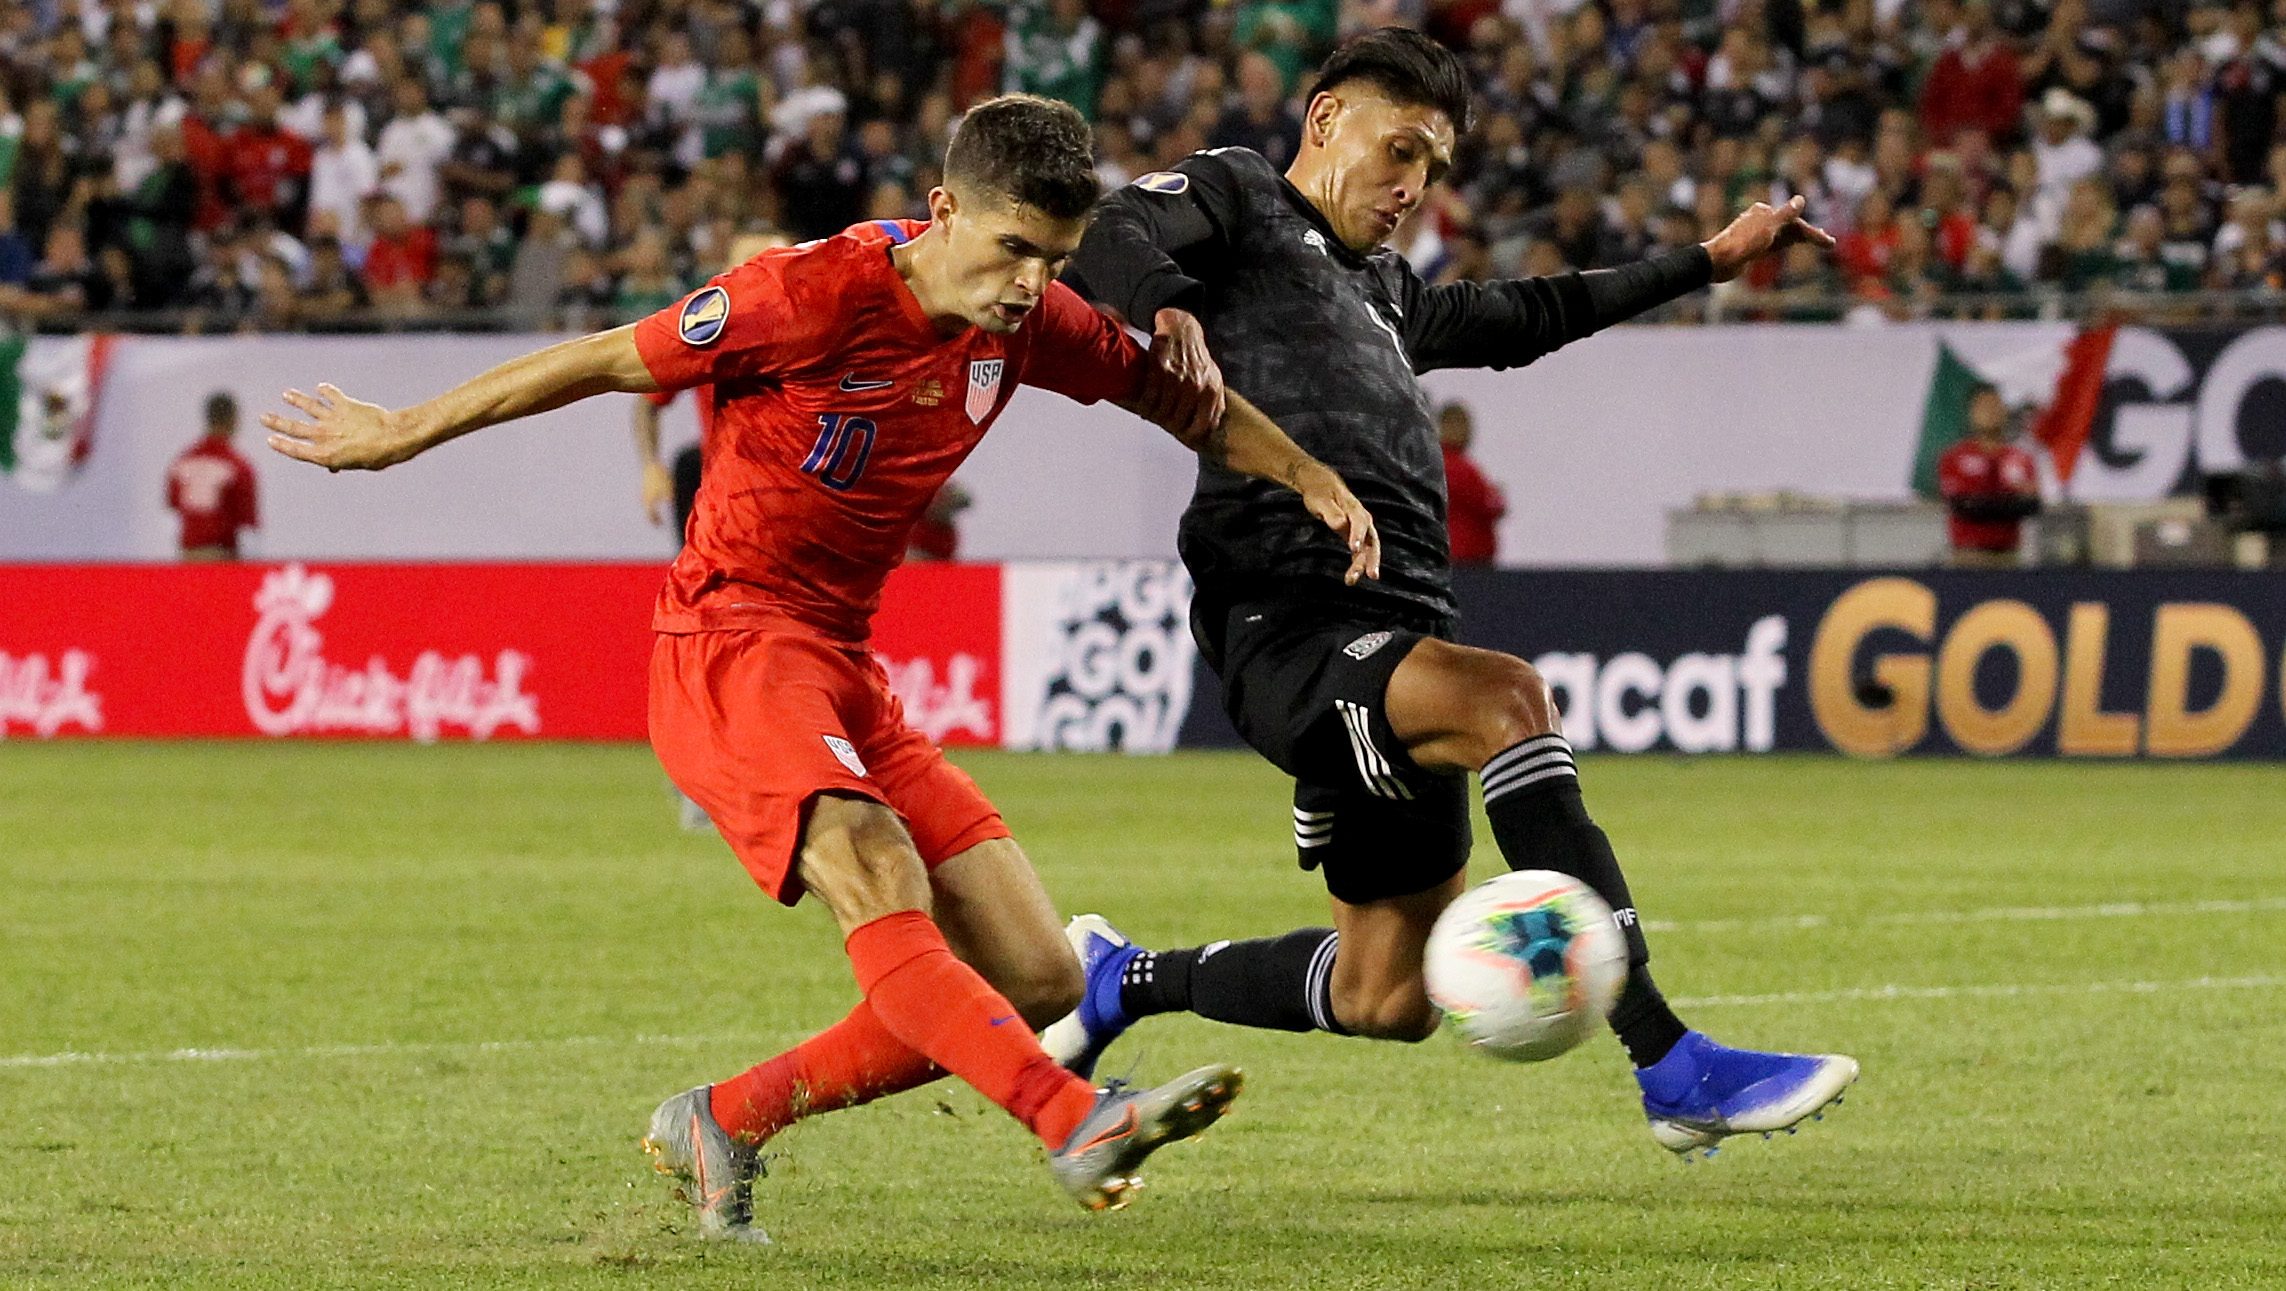 How to Watch USA vs Mexico Soccer Online Without Cable